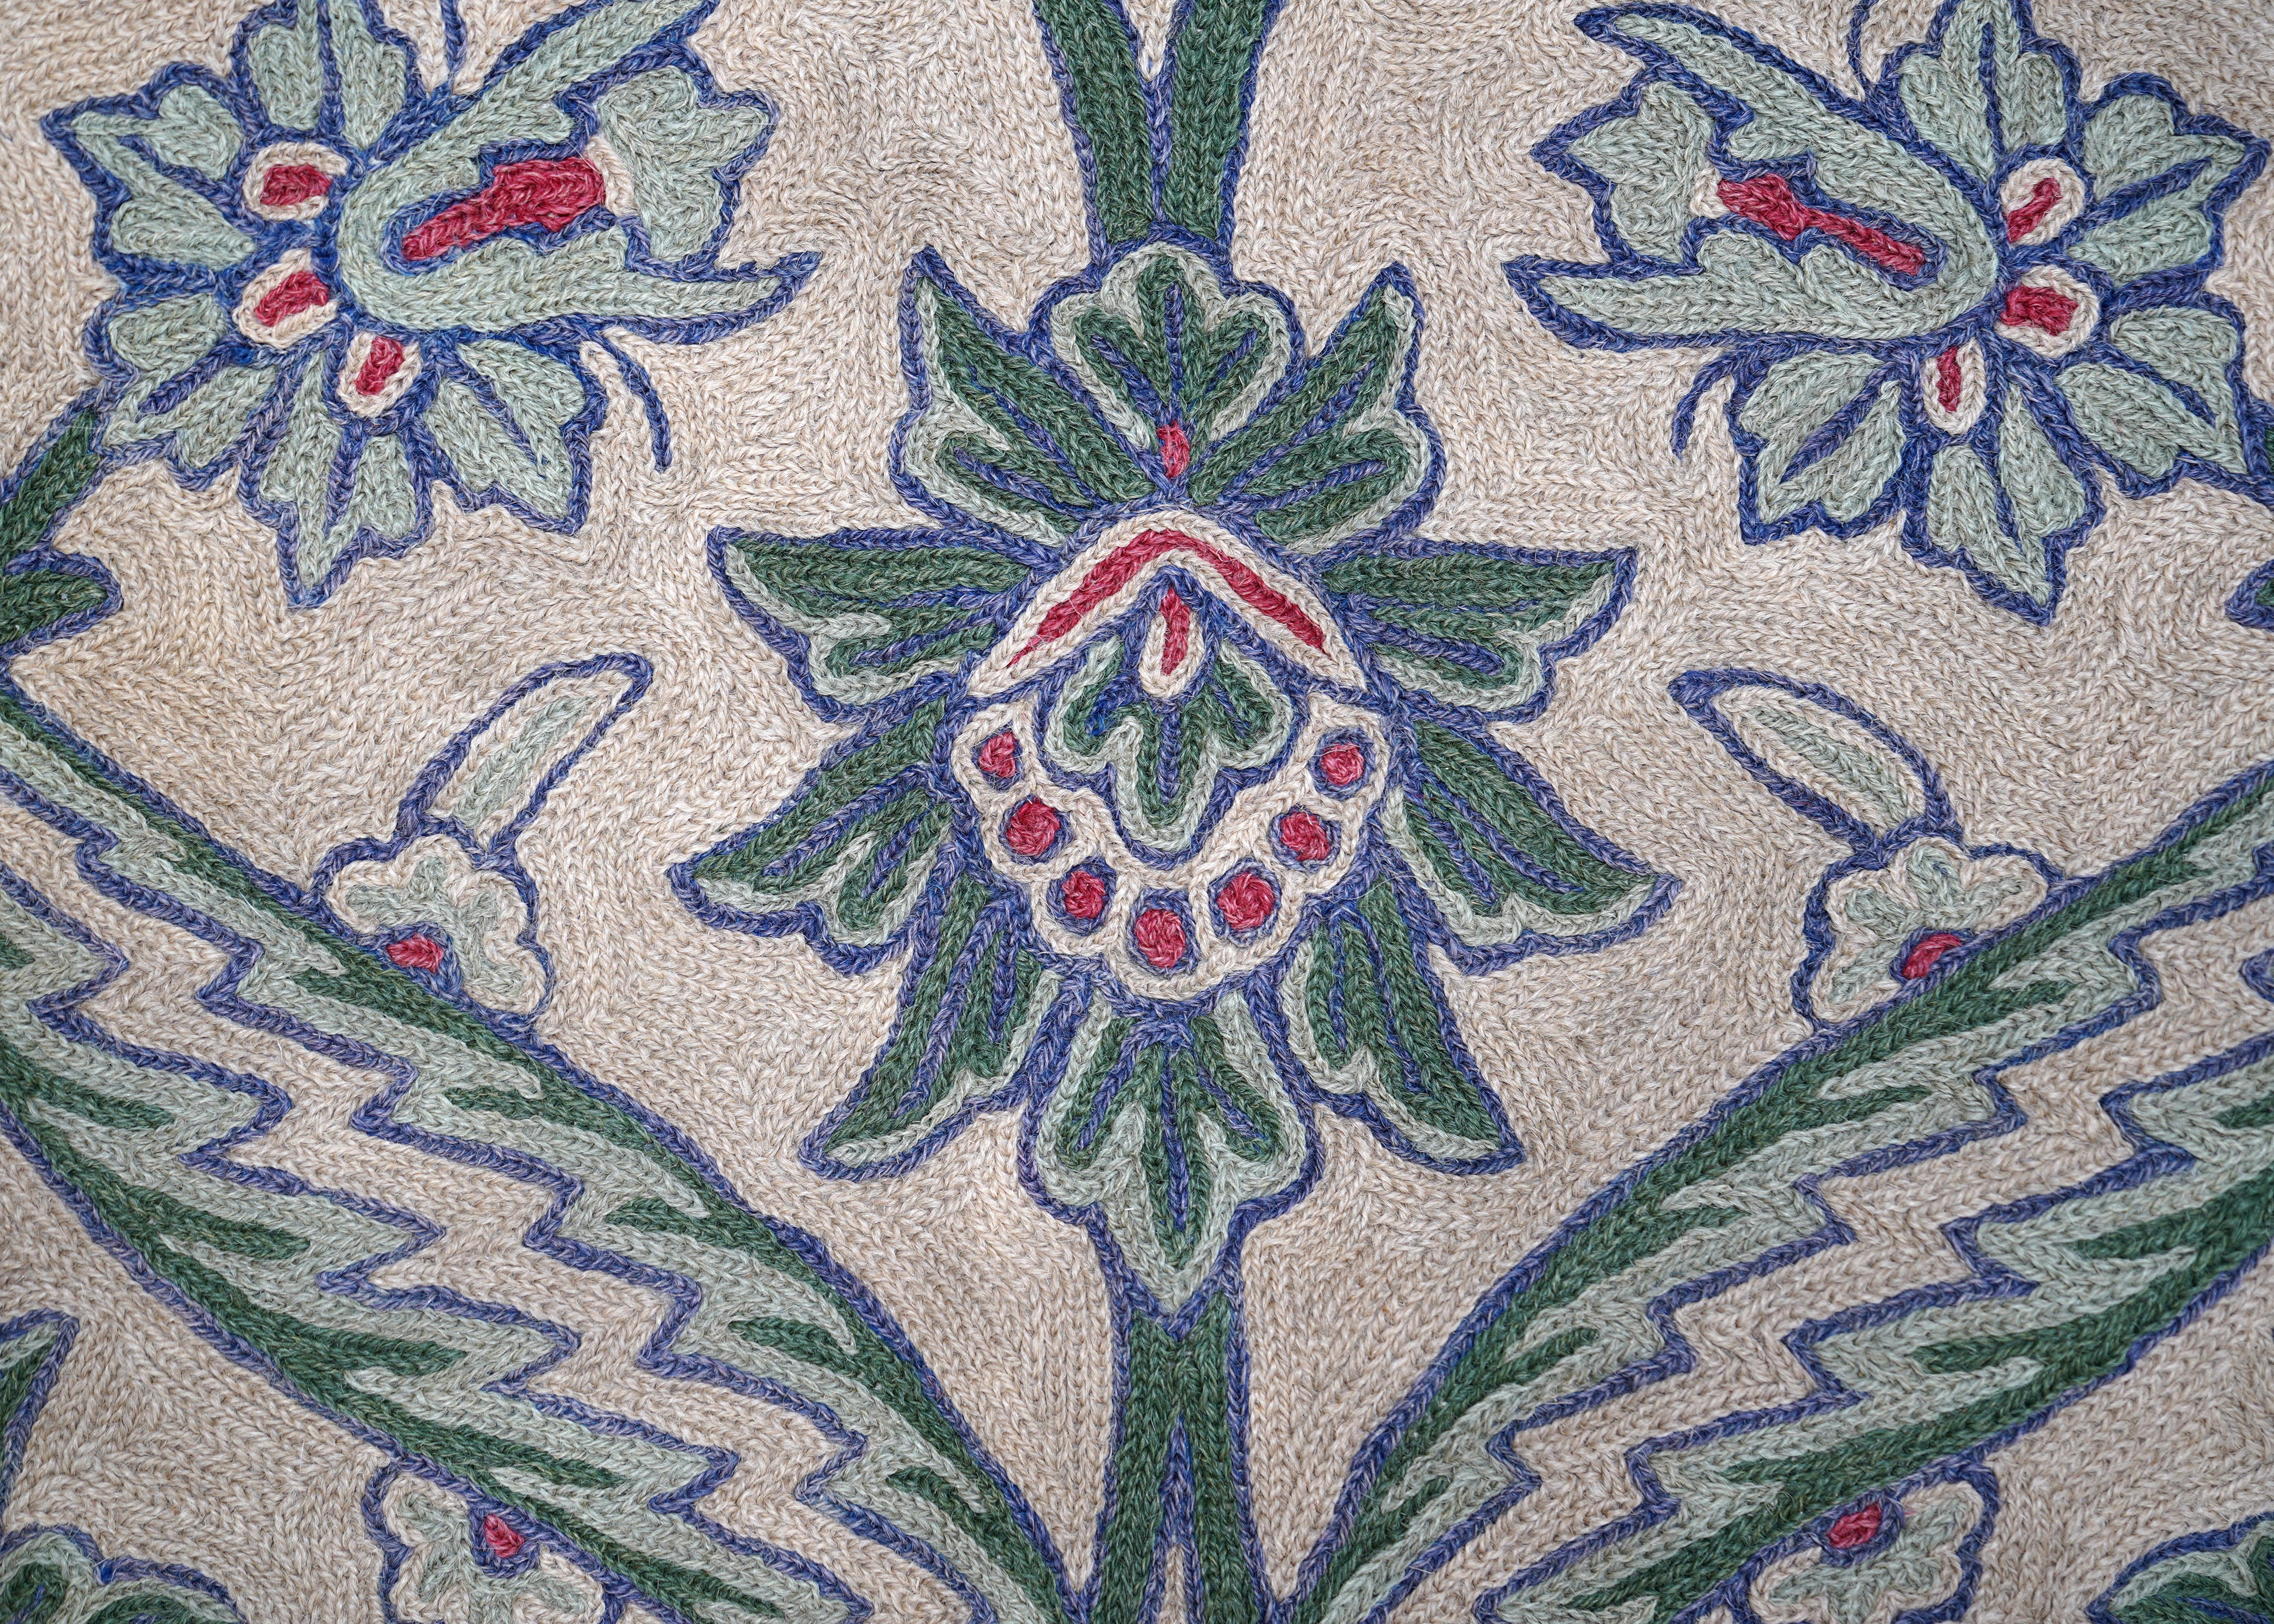 20th Century Vintage Crewelwork Flower/Floral Wall Hanging- Liberty Style - Blue, Red, Cream